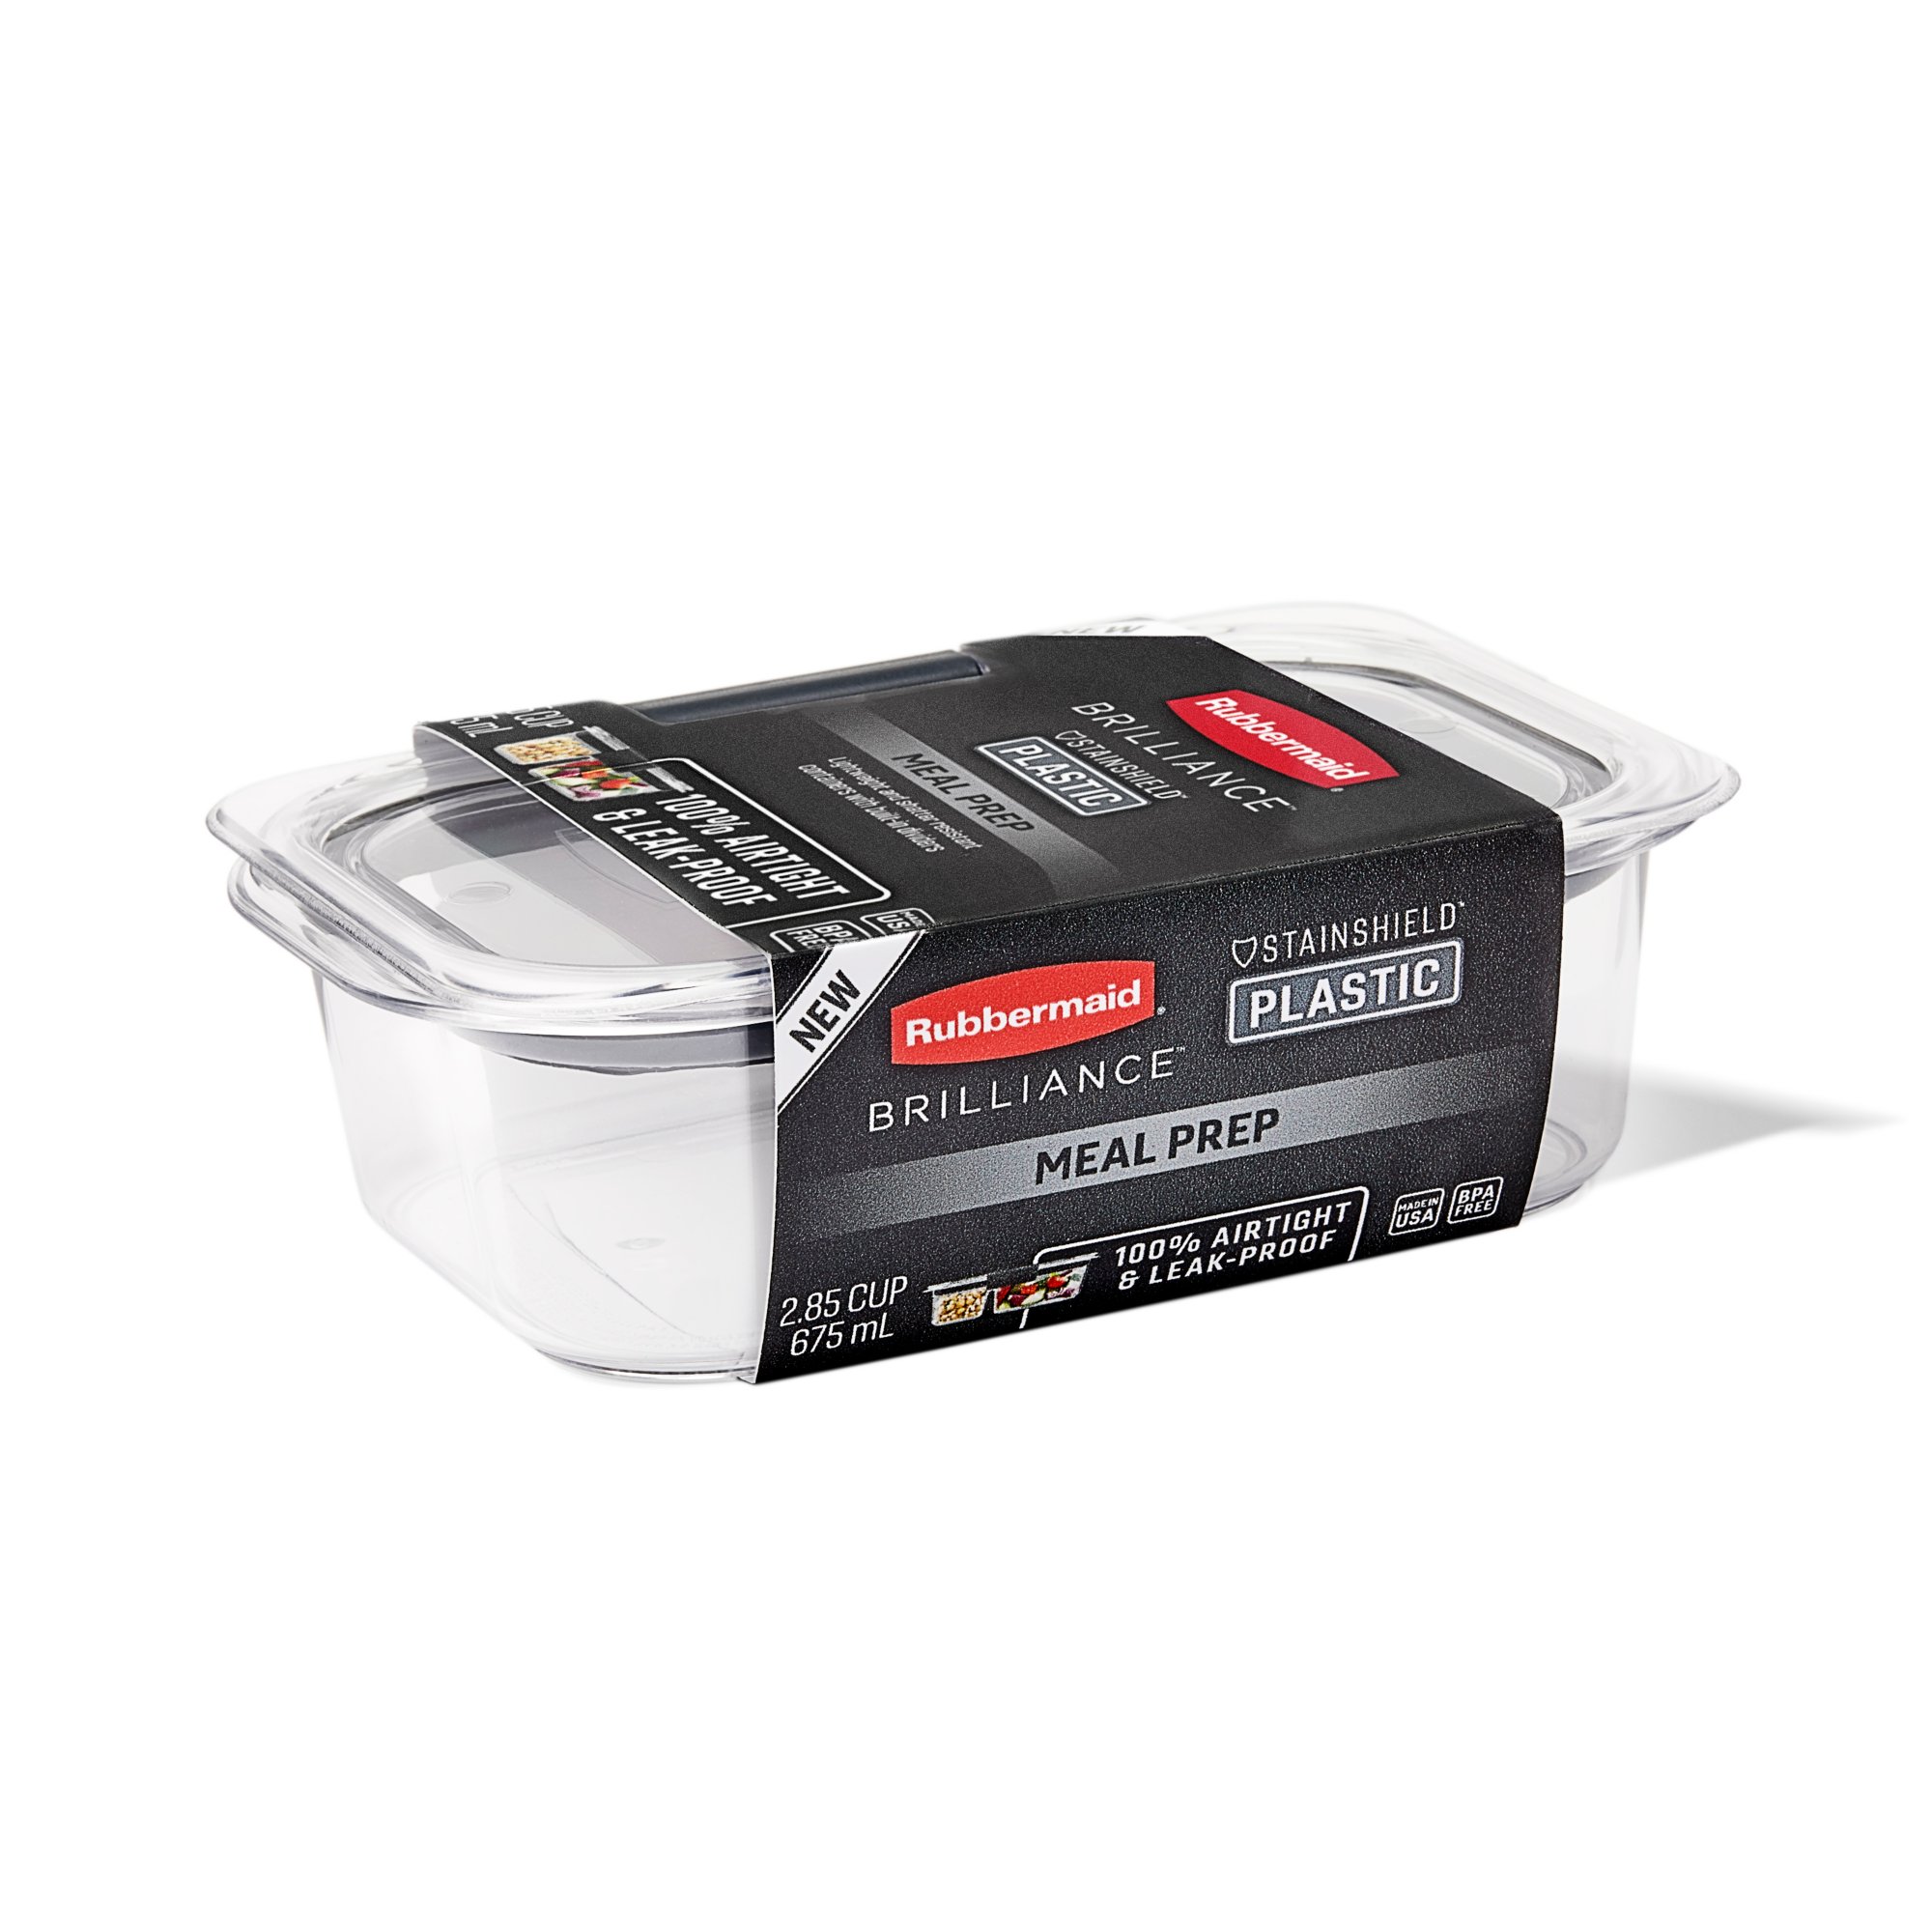 Rubbermaid Brilliance Food Storage Containers - Set of 5 (2.85 Cup), 2  Compartme